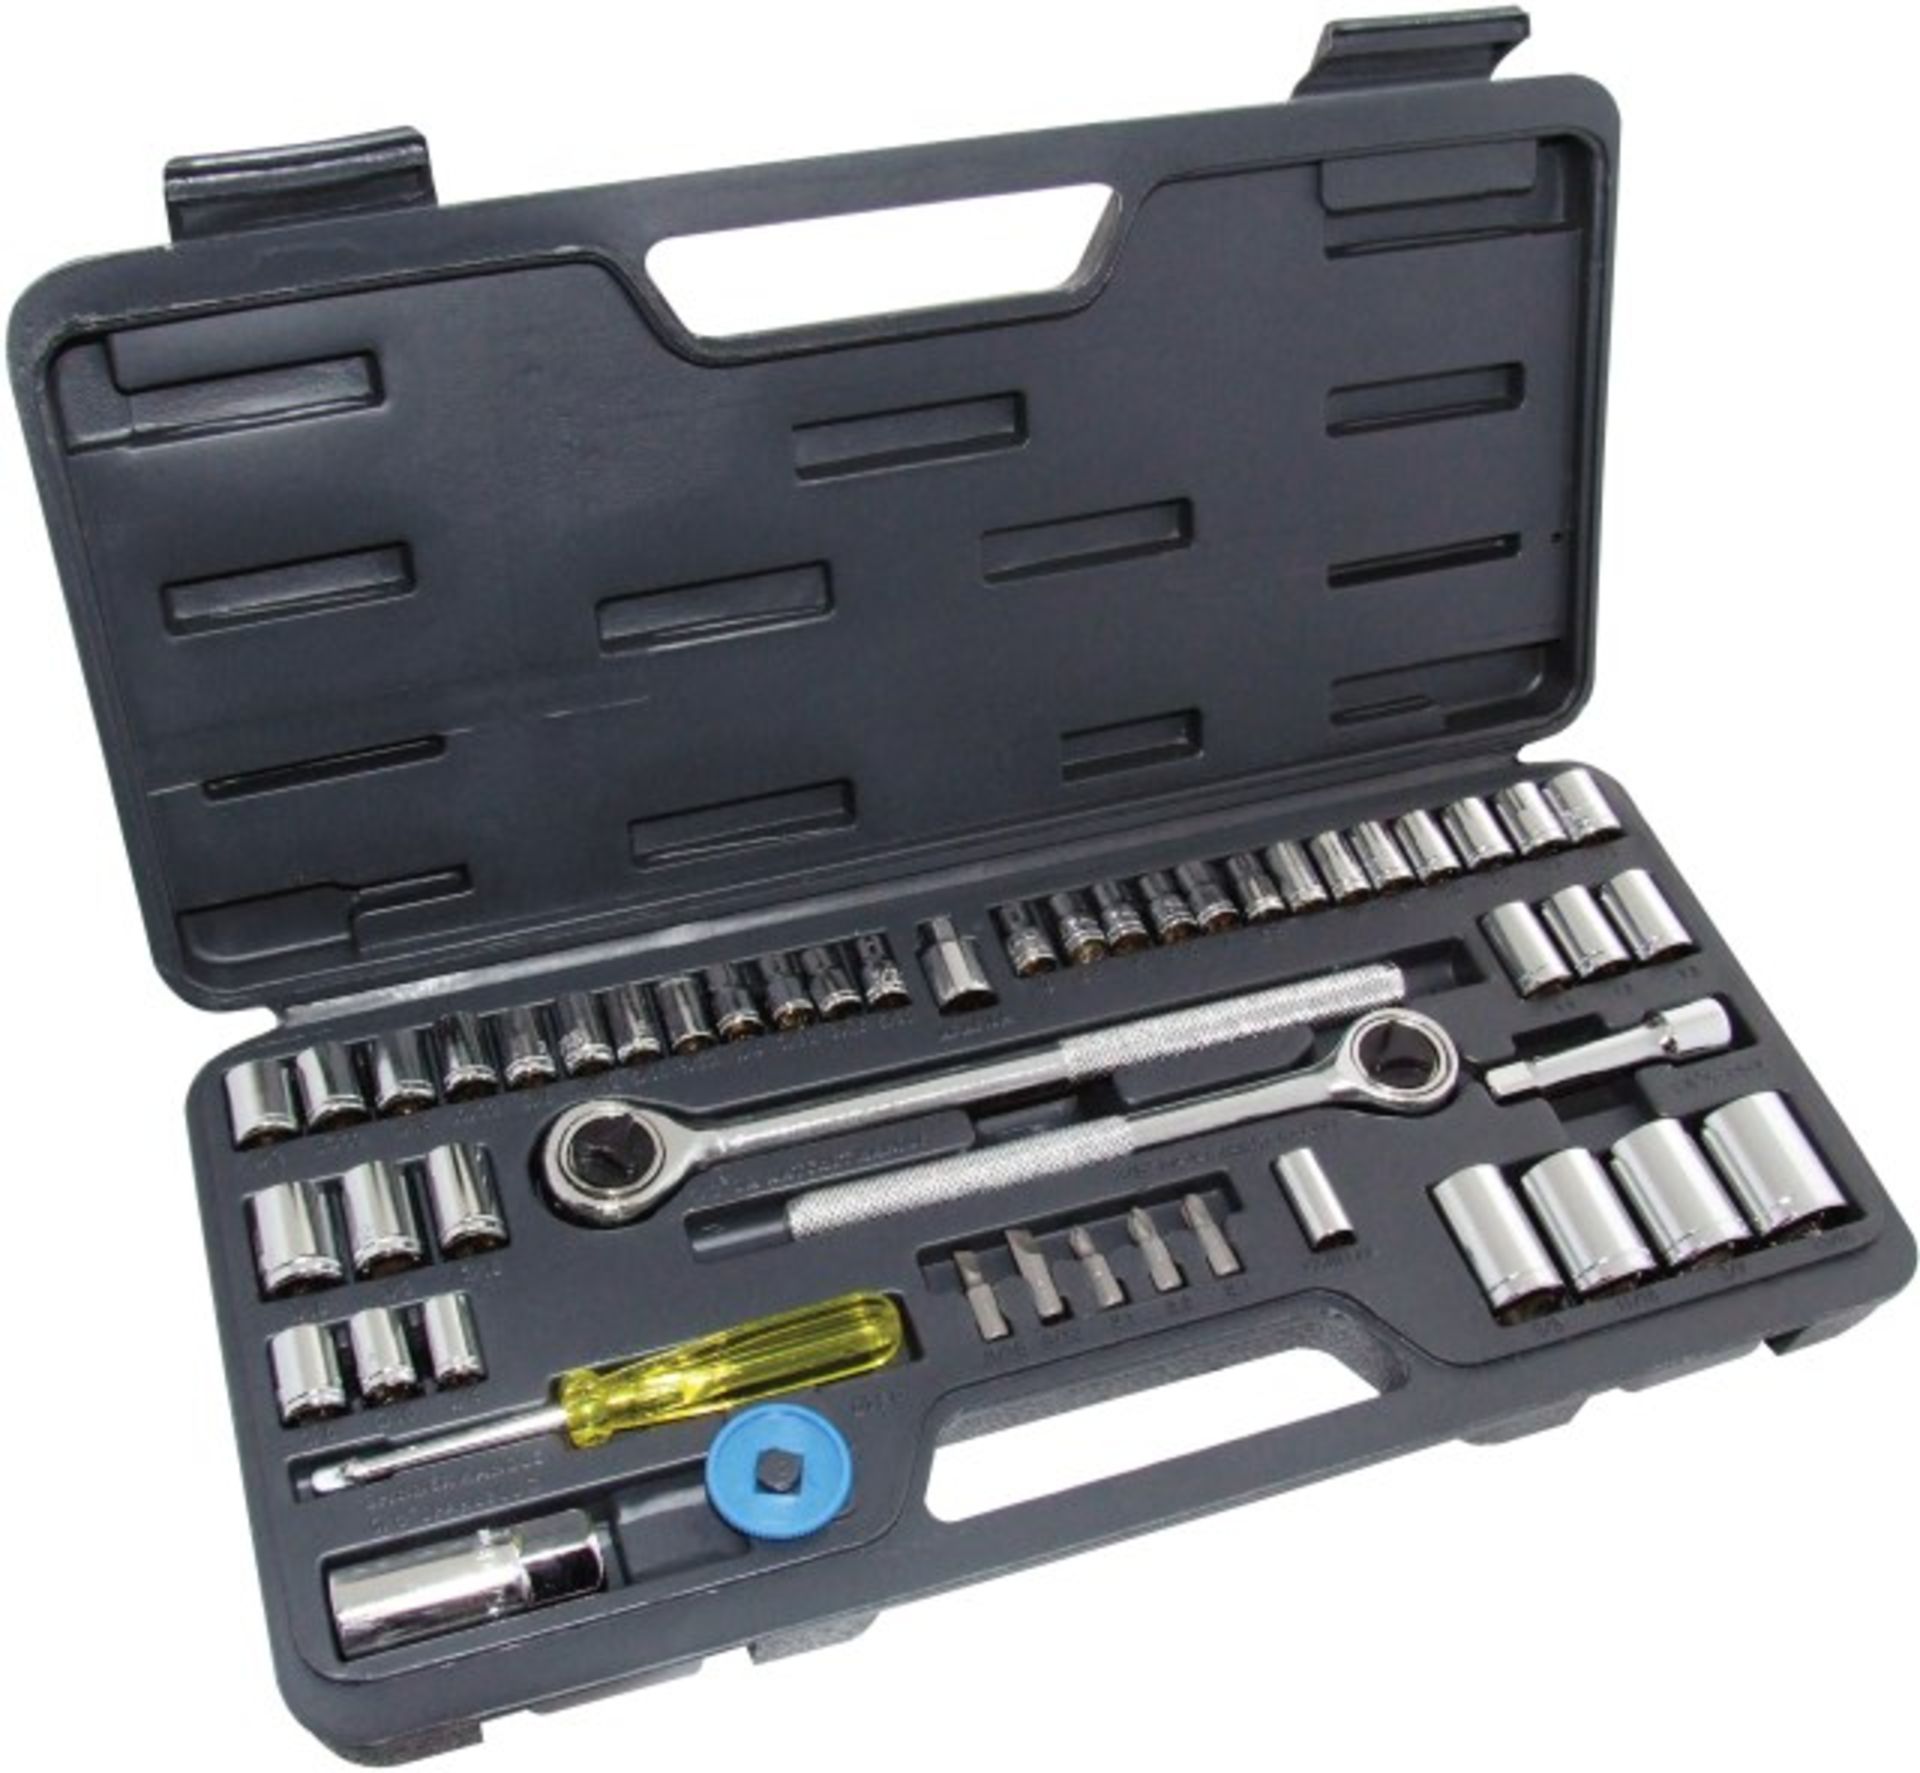 V Brand New 52 Piece Chrome Socket Set With 3 Year Warranty X 2 YOUR BID PRICE TO BE MULTIPLIED BY